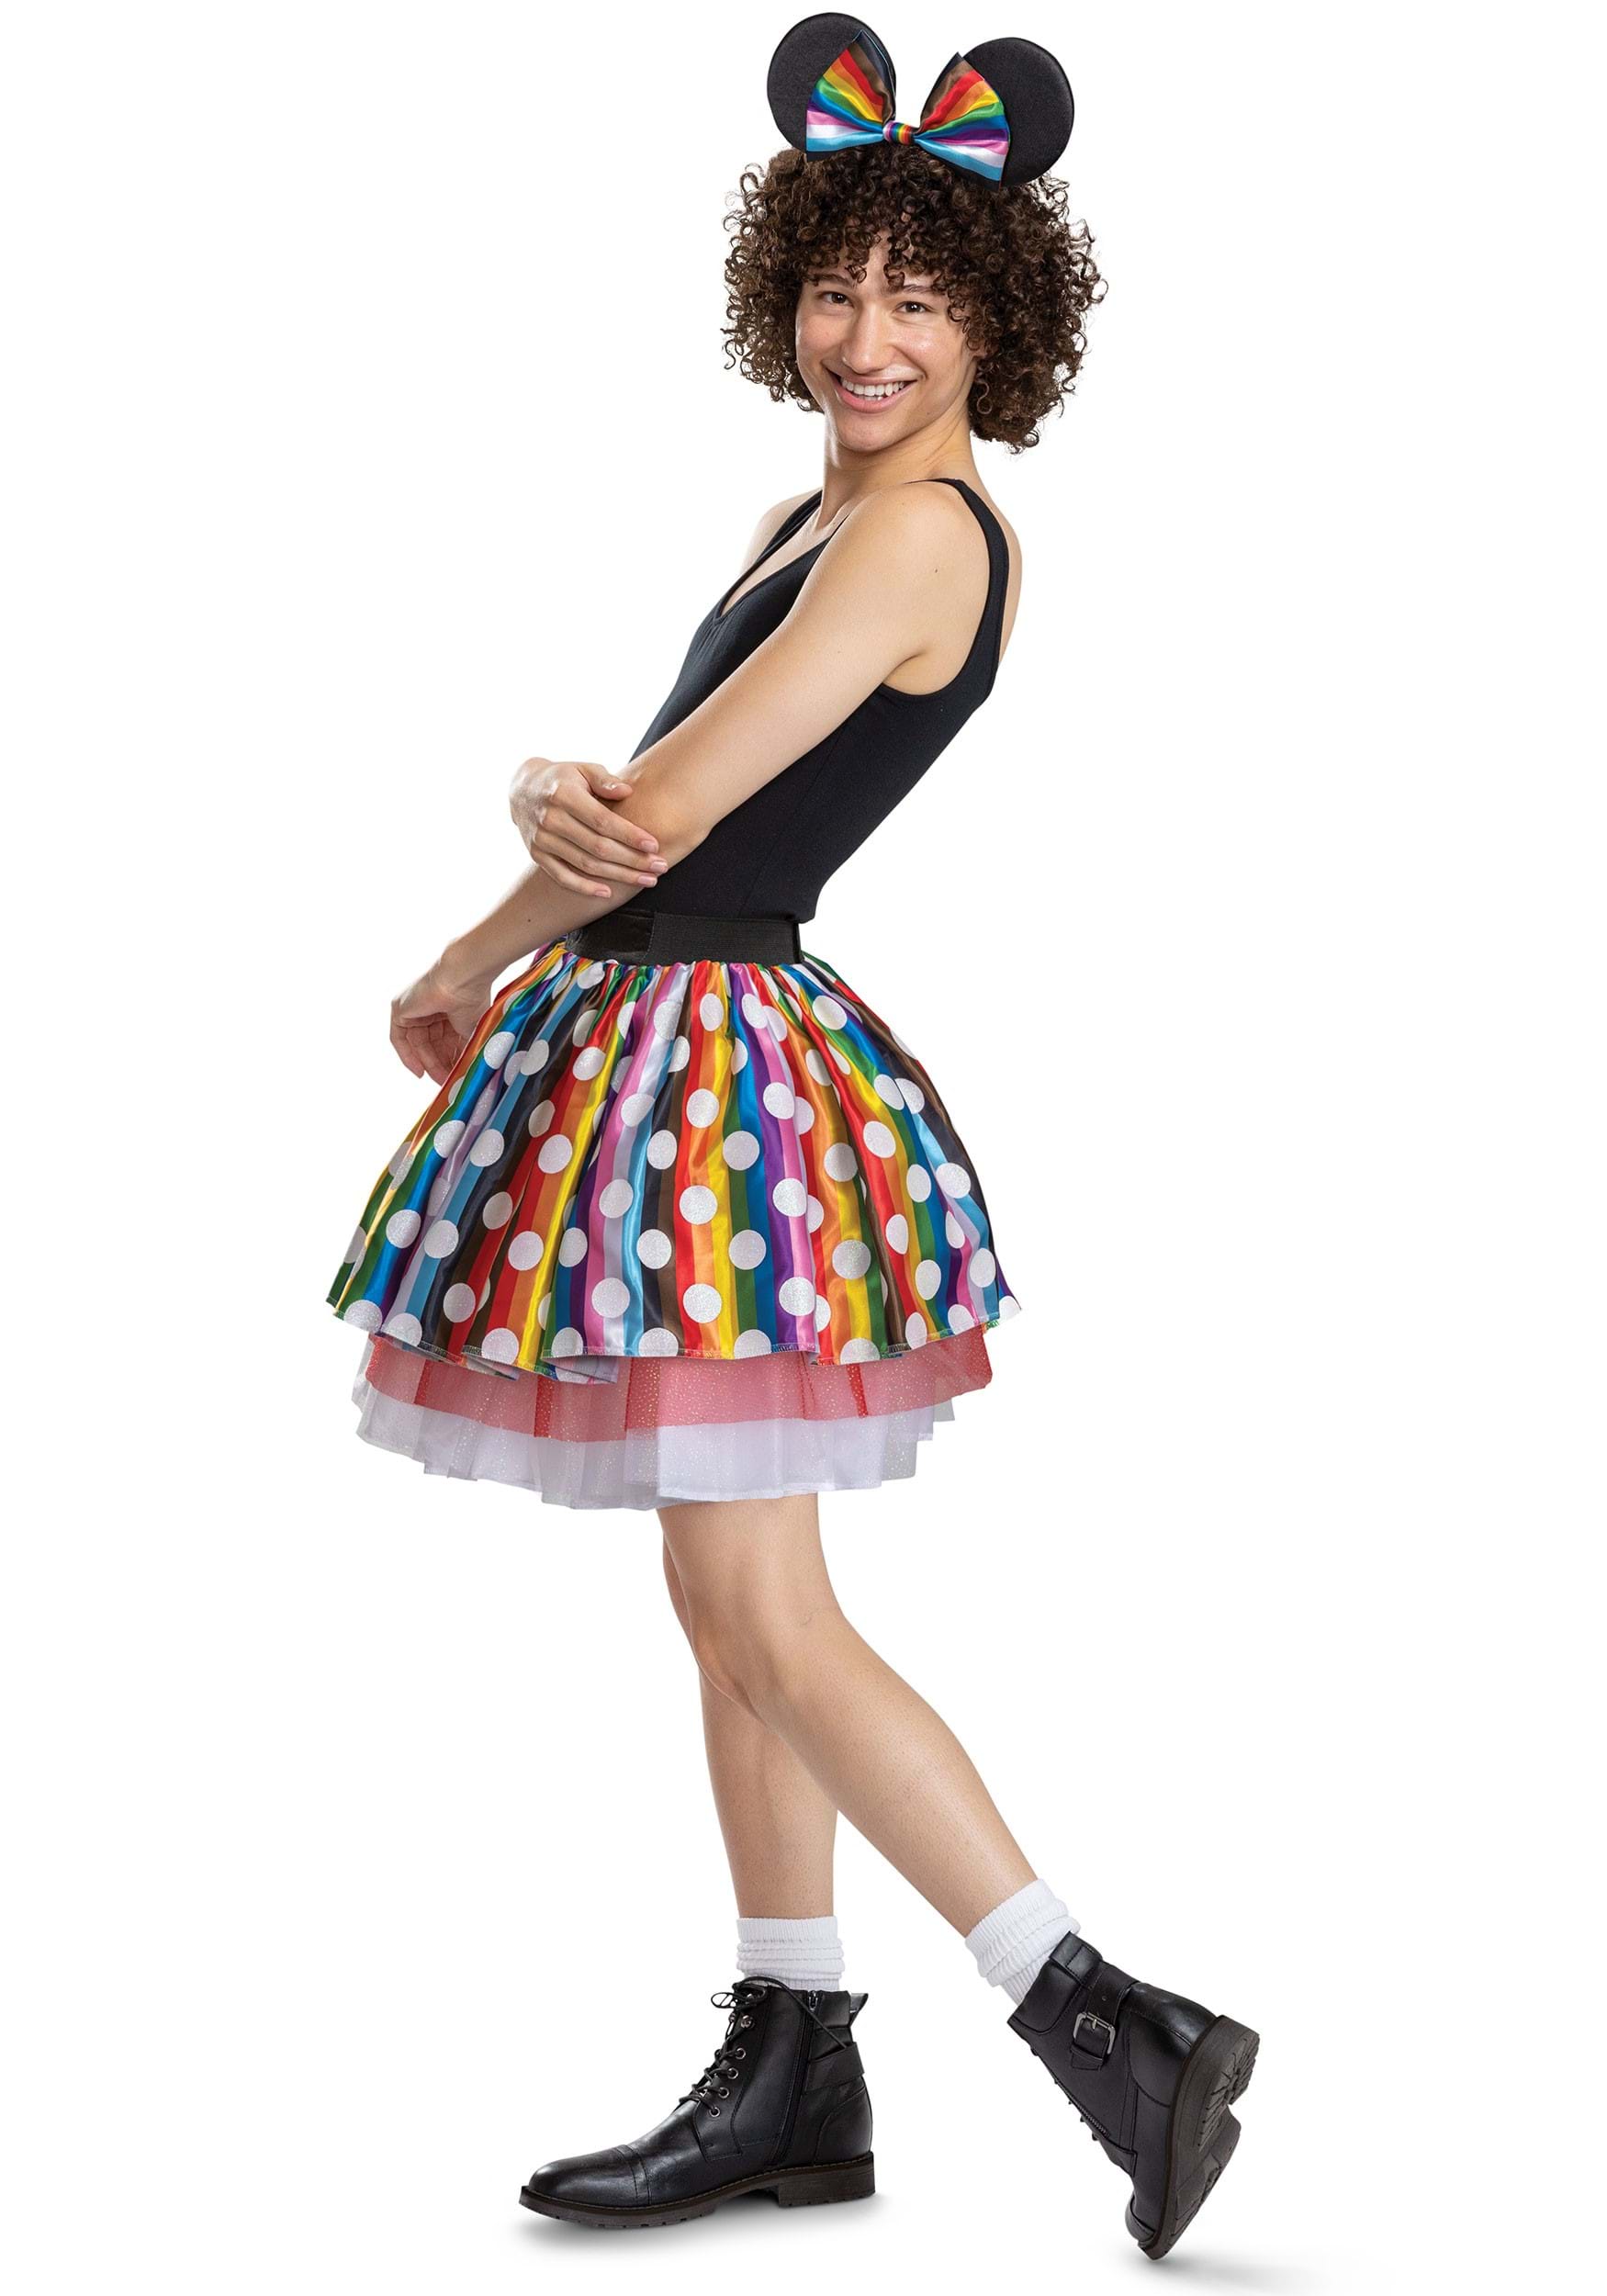 Disney Pride Minnie Mouse Costume For Adults